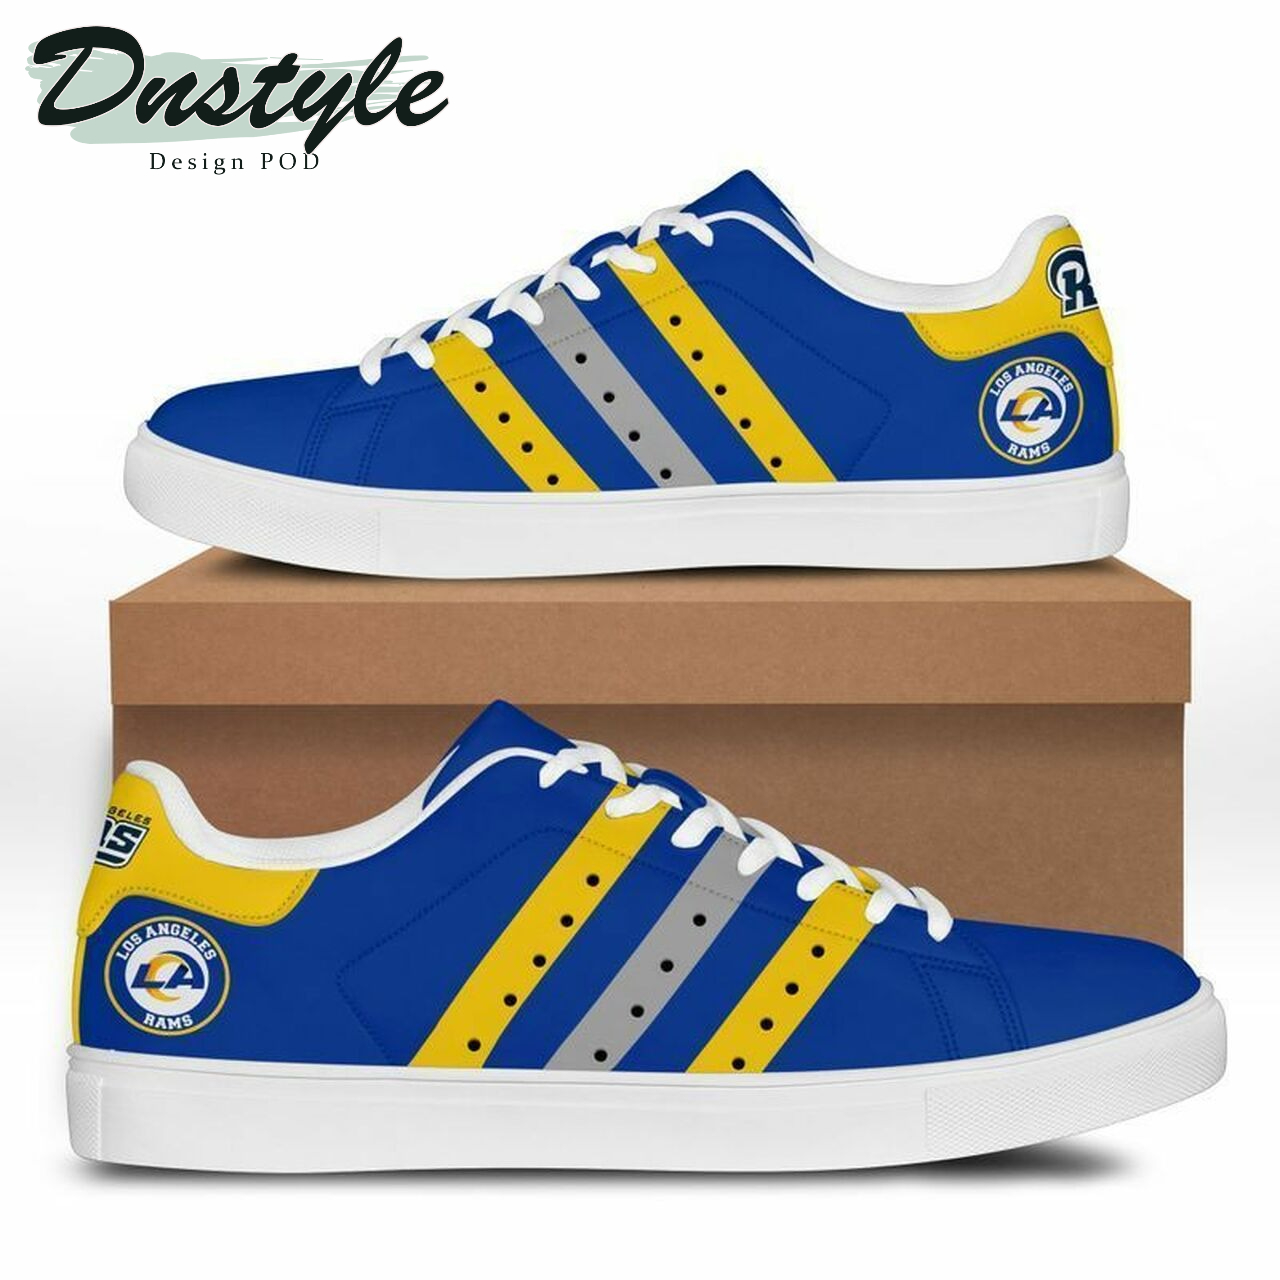 Los angeles rams stan smith low top skate shoes NFL